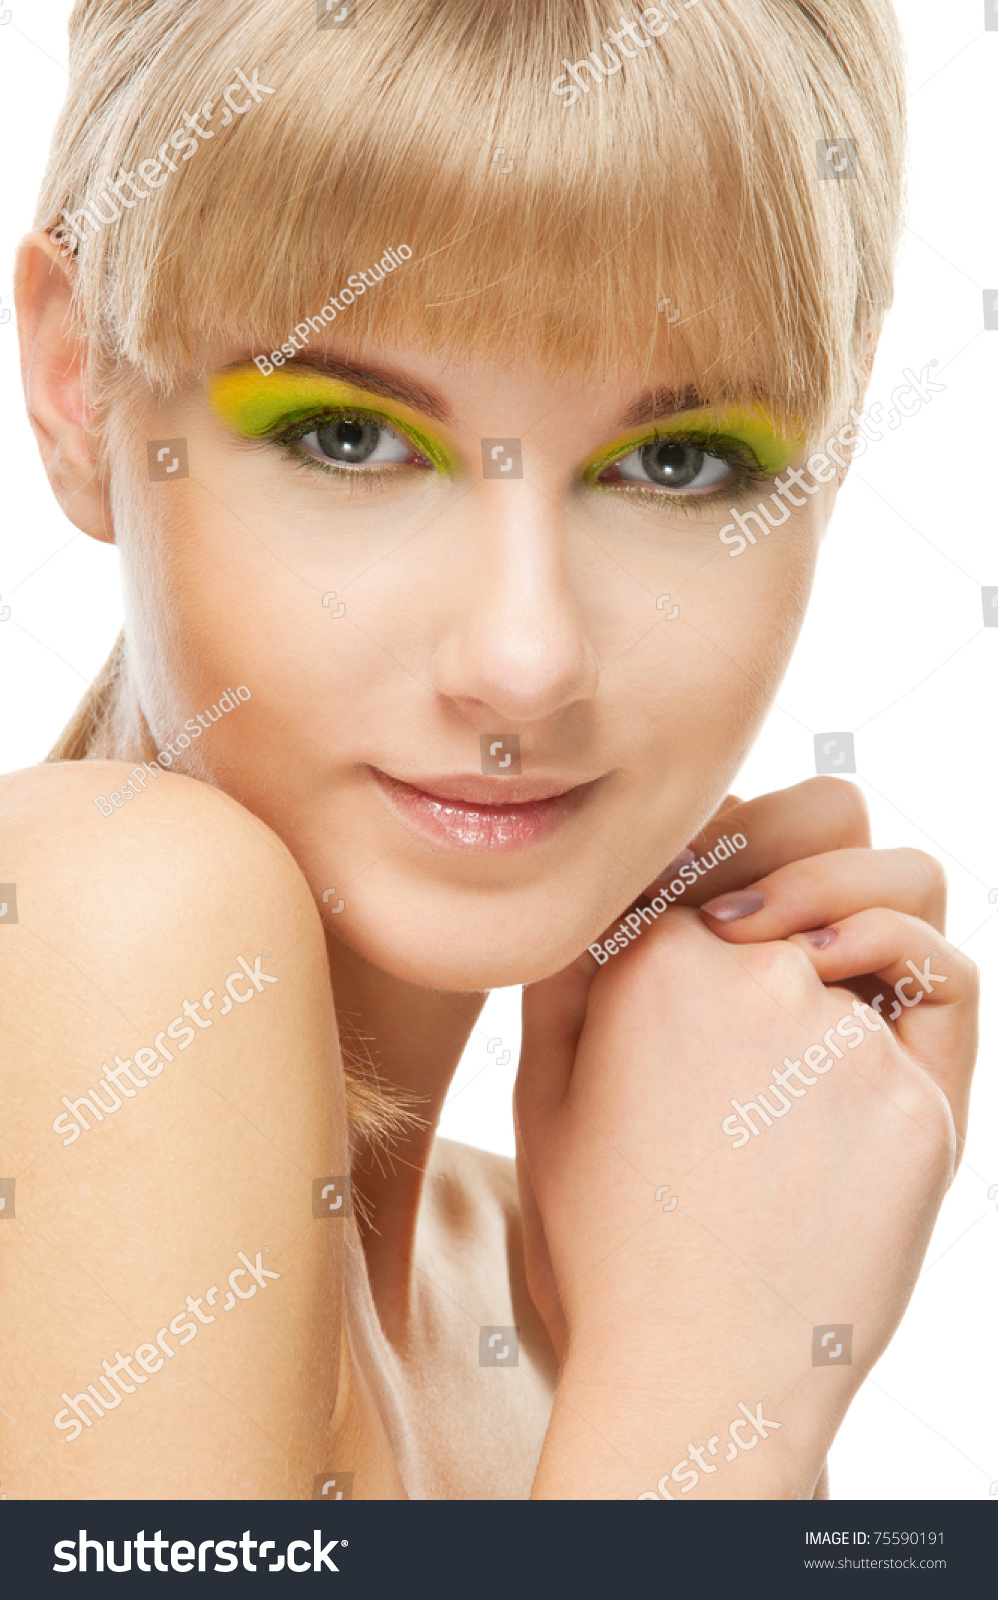 Portrait Of Woman With Naked Shoulders Stock Image - Image 